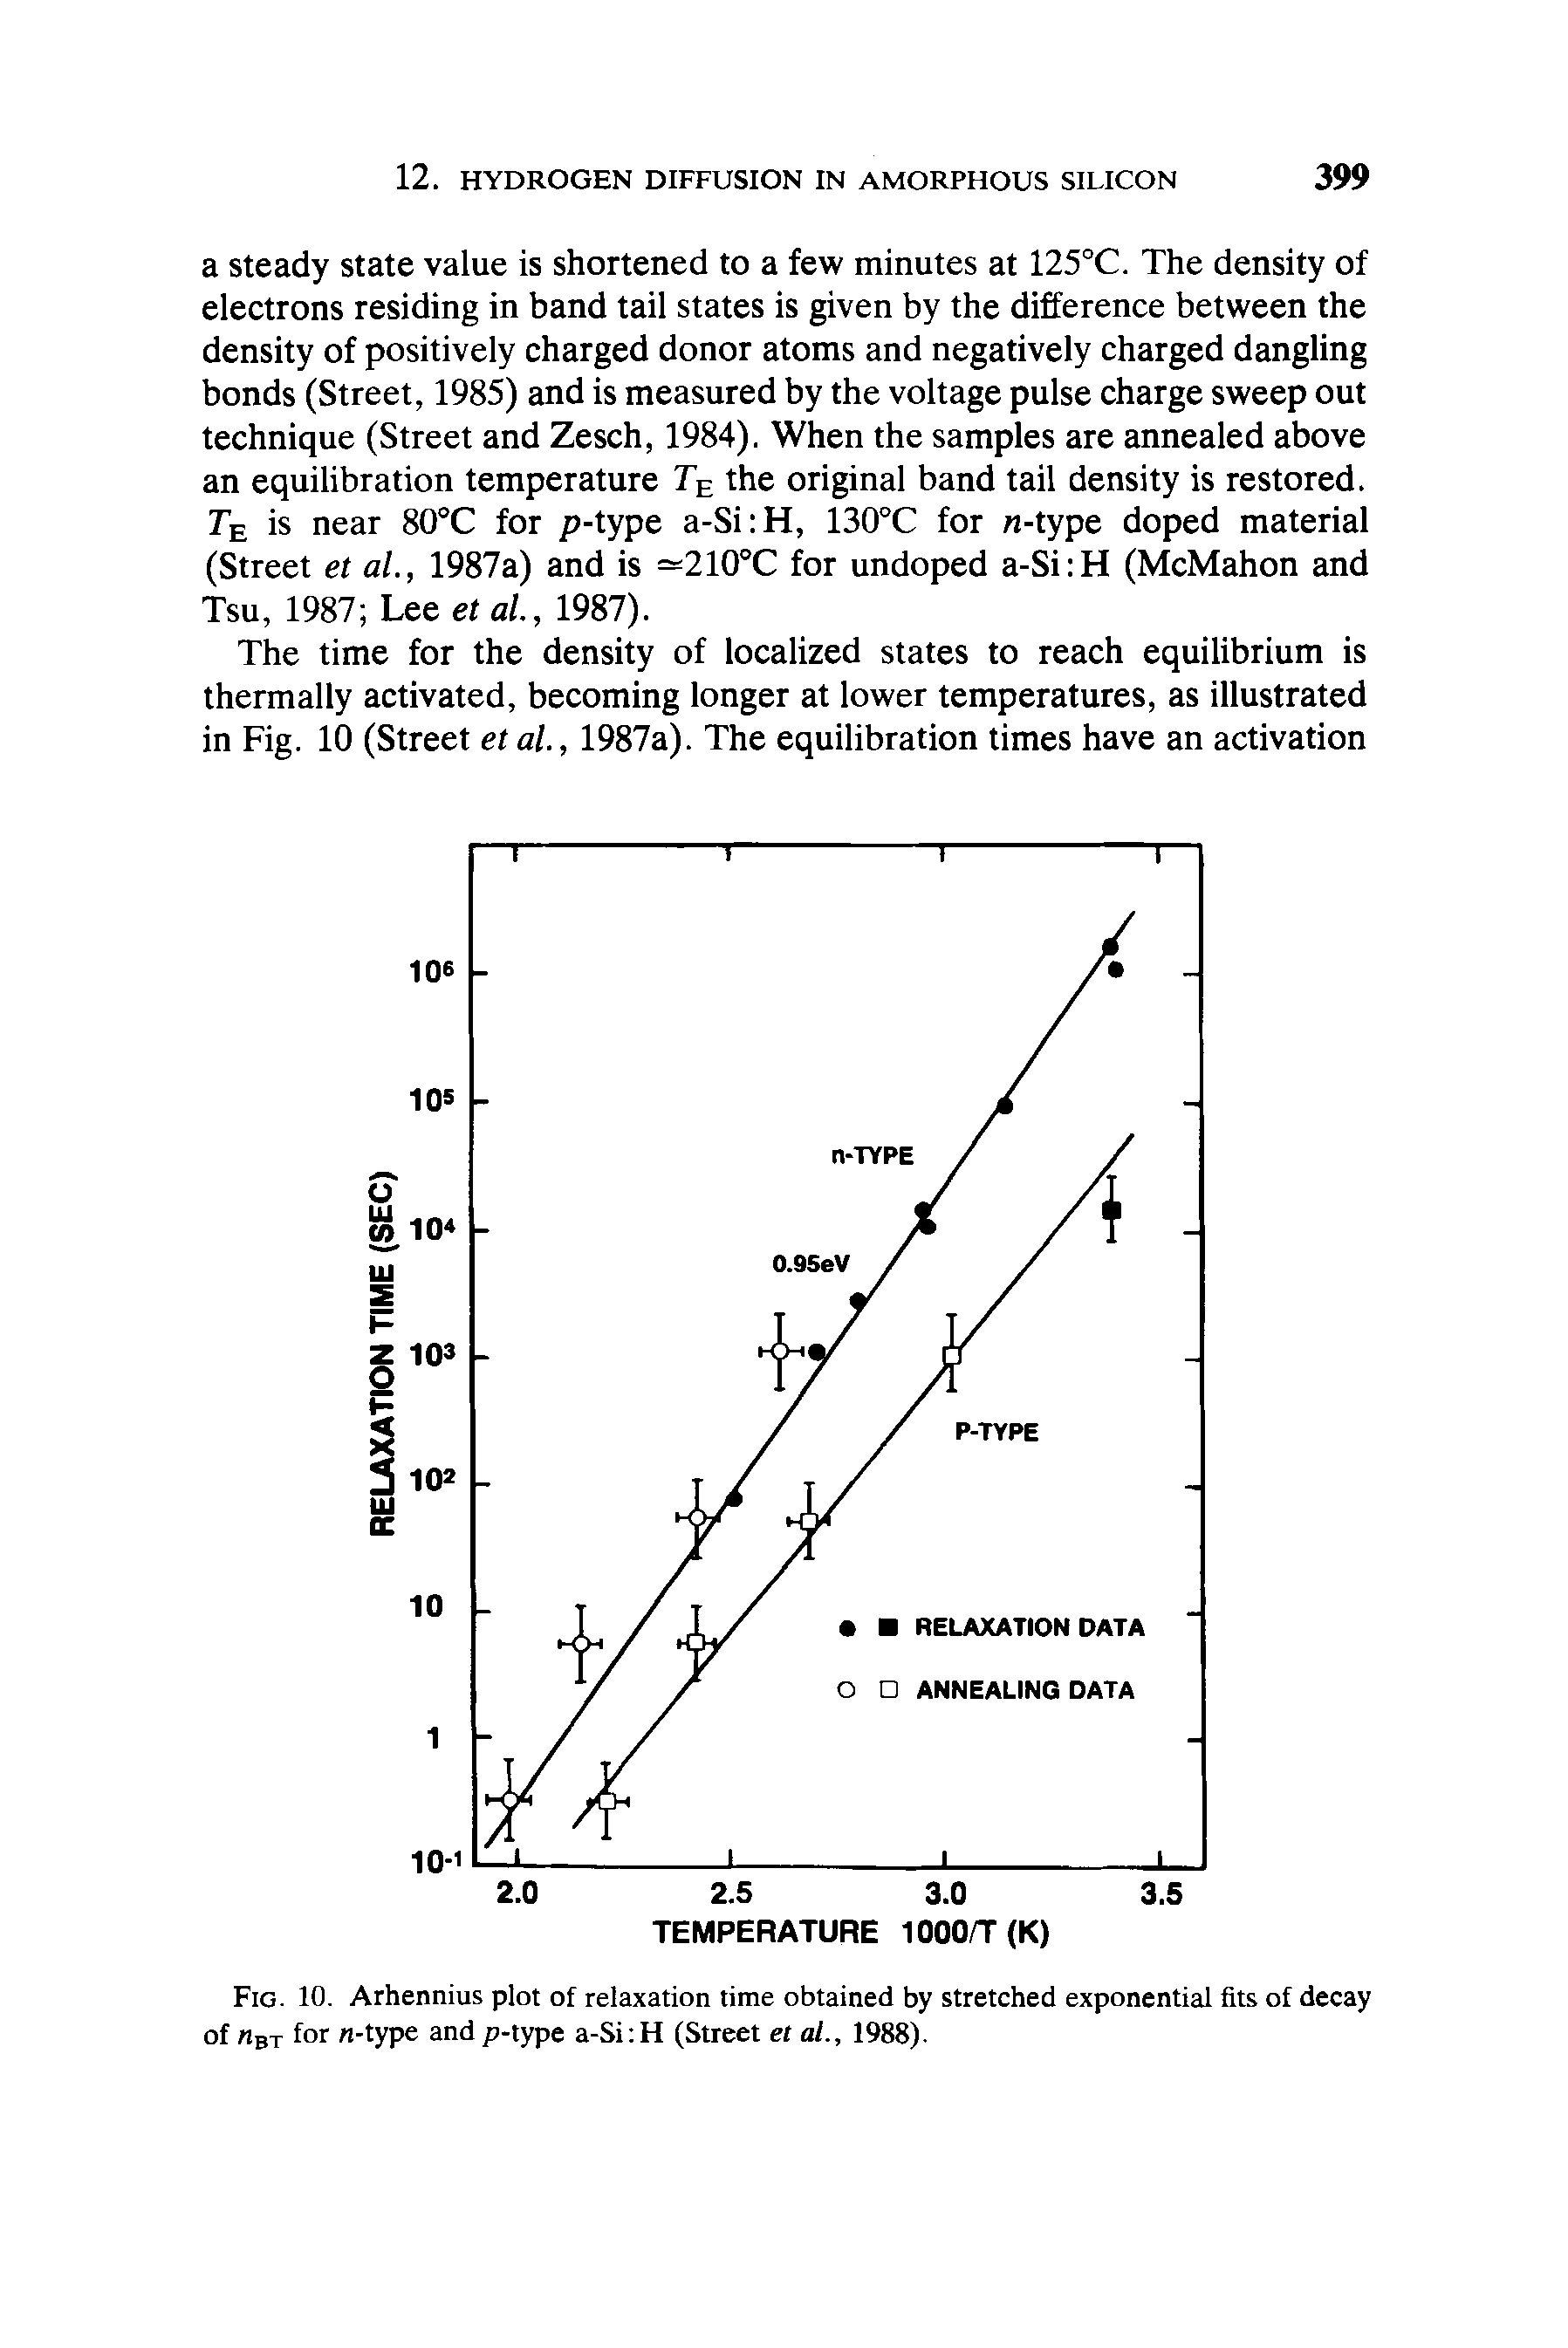 Fig. 10. Arhennius plot of relaxation time obtained by stretched exponential fits of decay of nBx for n-type and p-type a-Si H (Street et al., 1988).